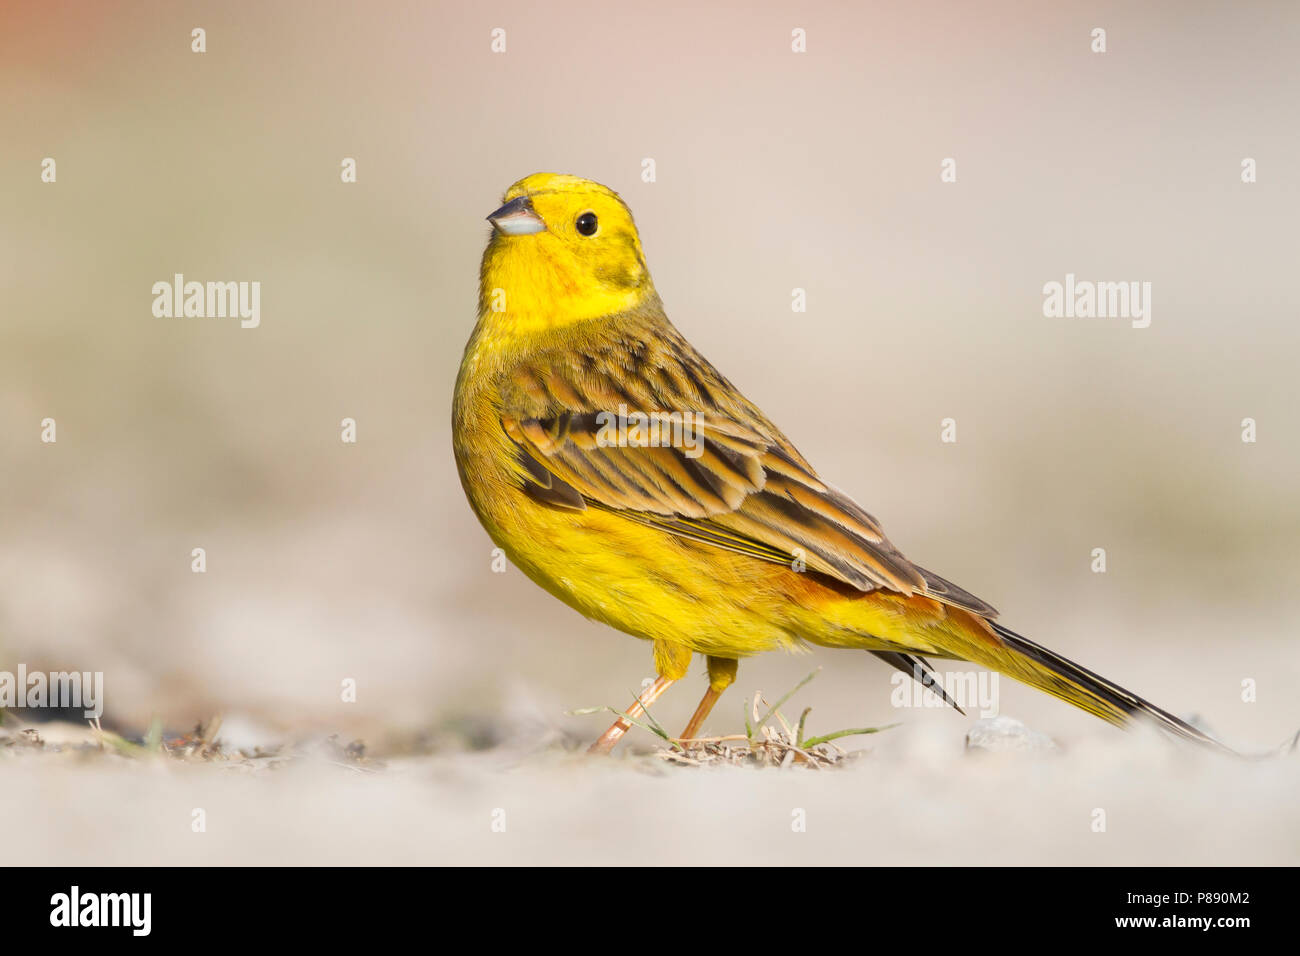 Yellowhammer - Goldammer - Emberiza citrinella ssp. citrinella, Germany, adult male standing on the ground Stock Photo